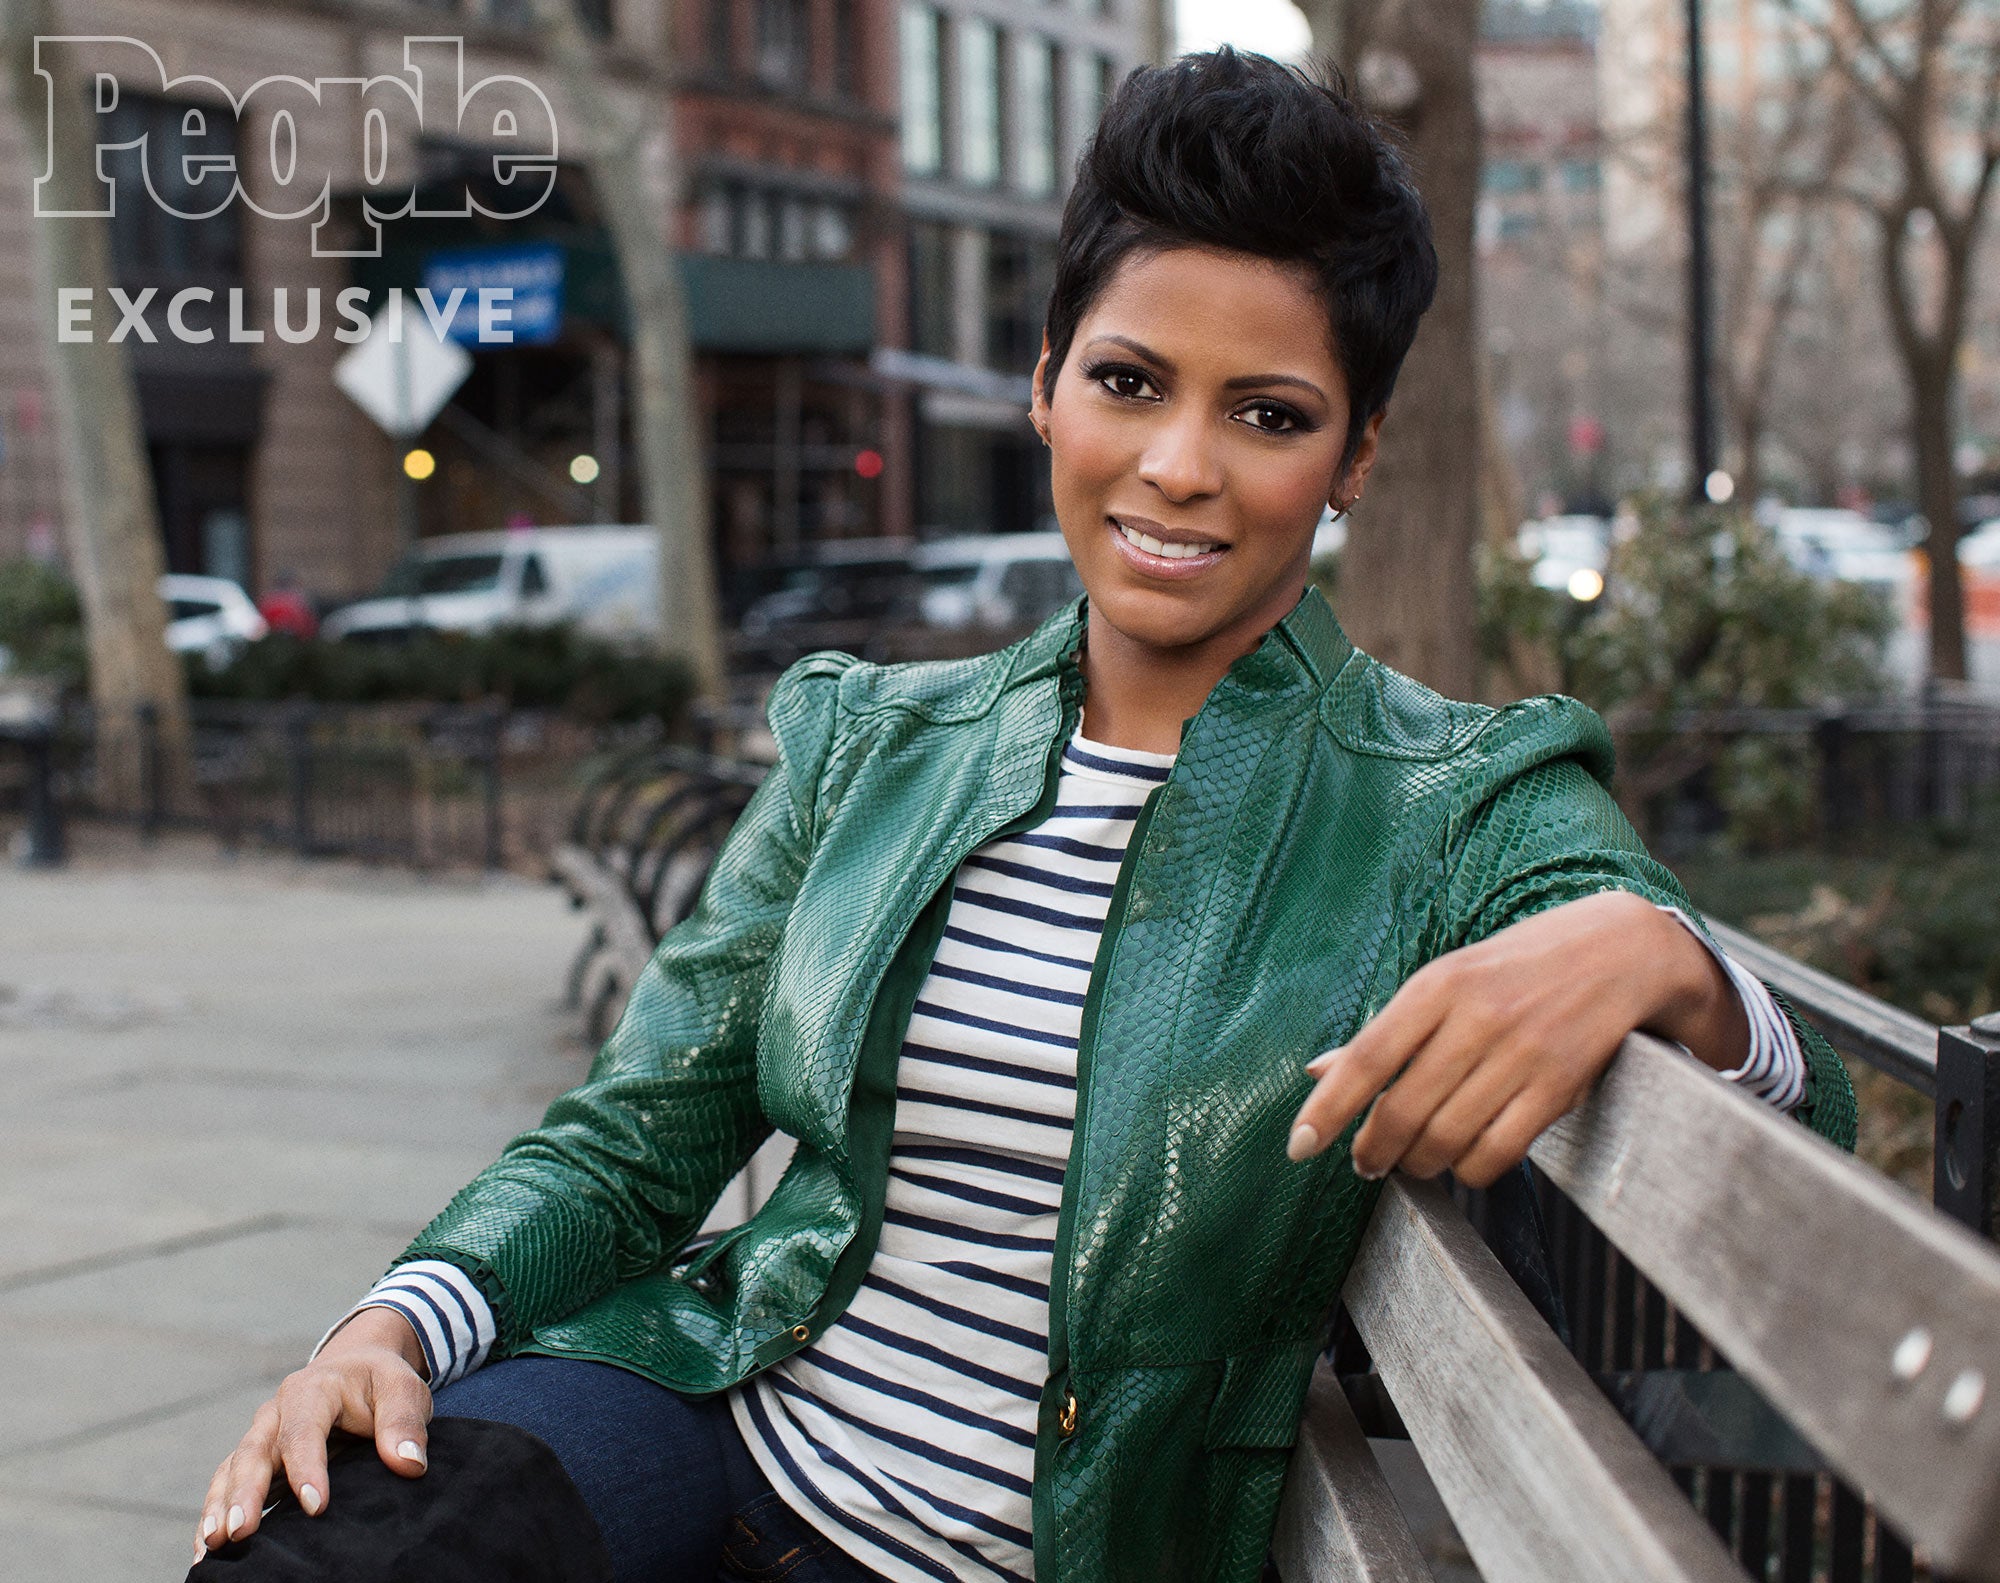 Why Tamron Hall Walked Away From Today: ‘She Wasn’t Going to Settle for Sitting on the Sidelines’
